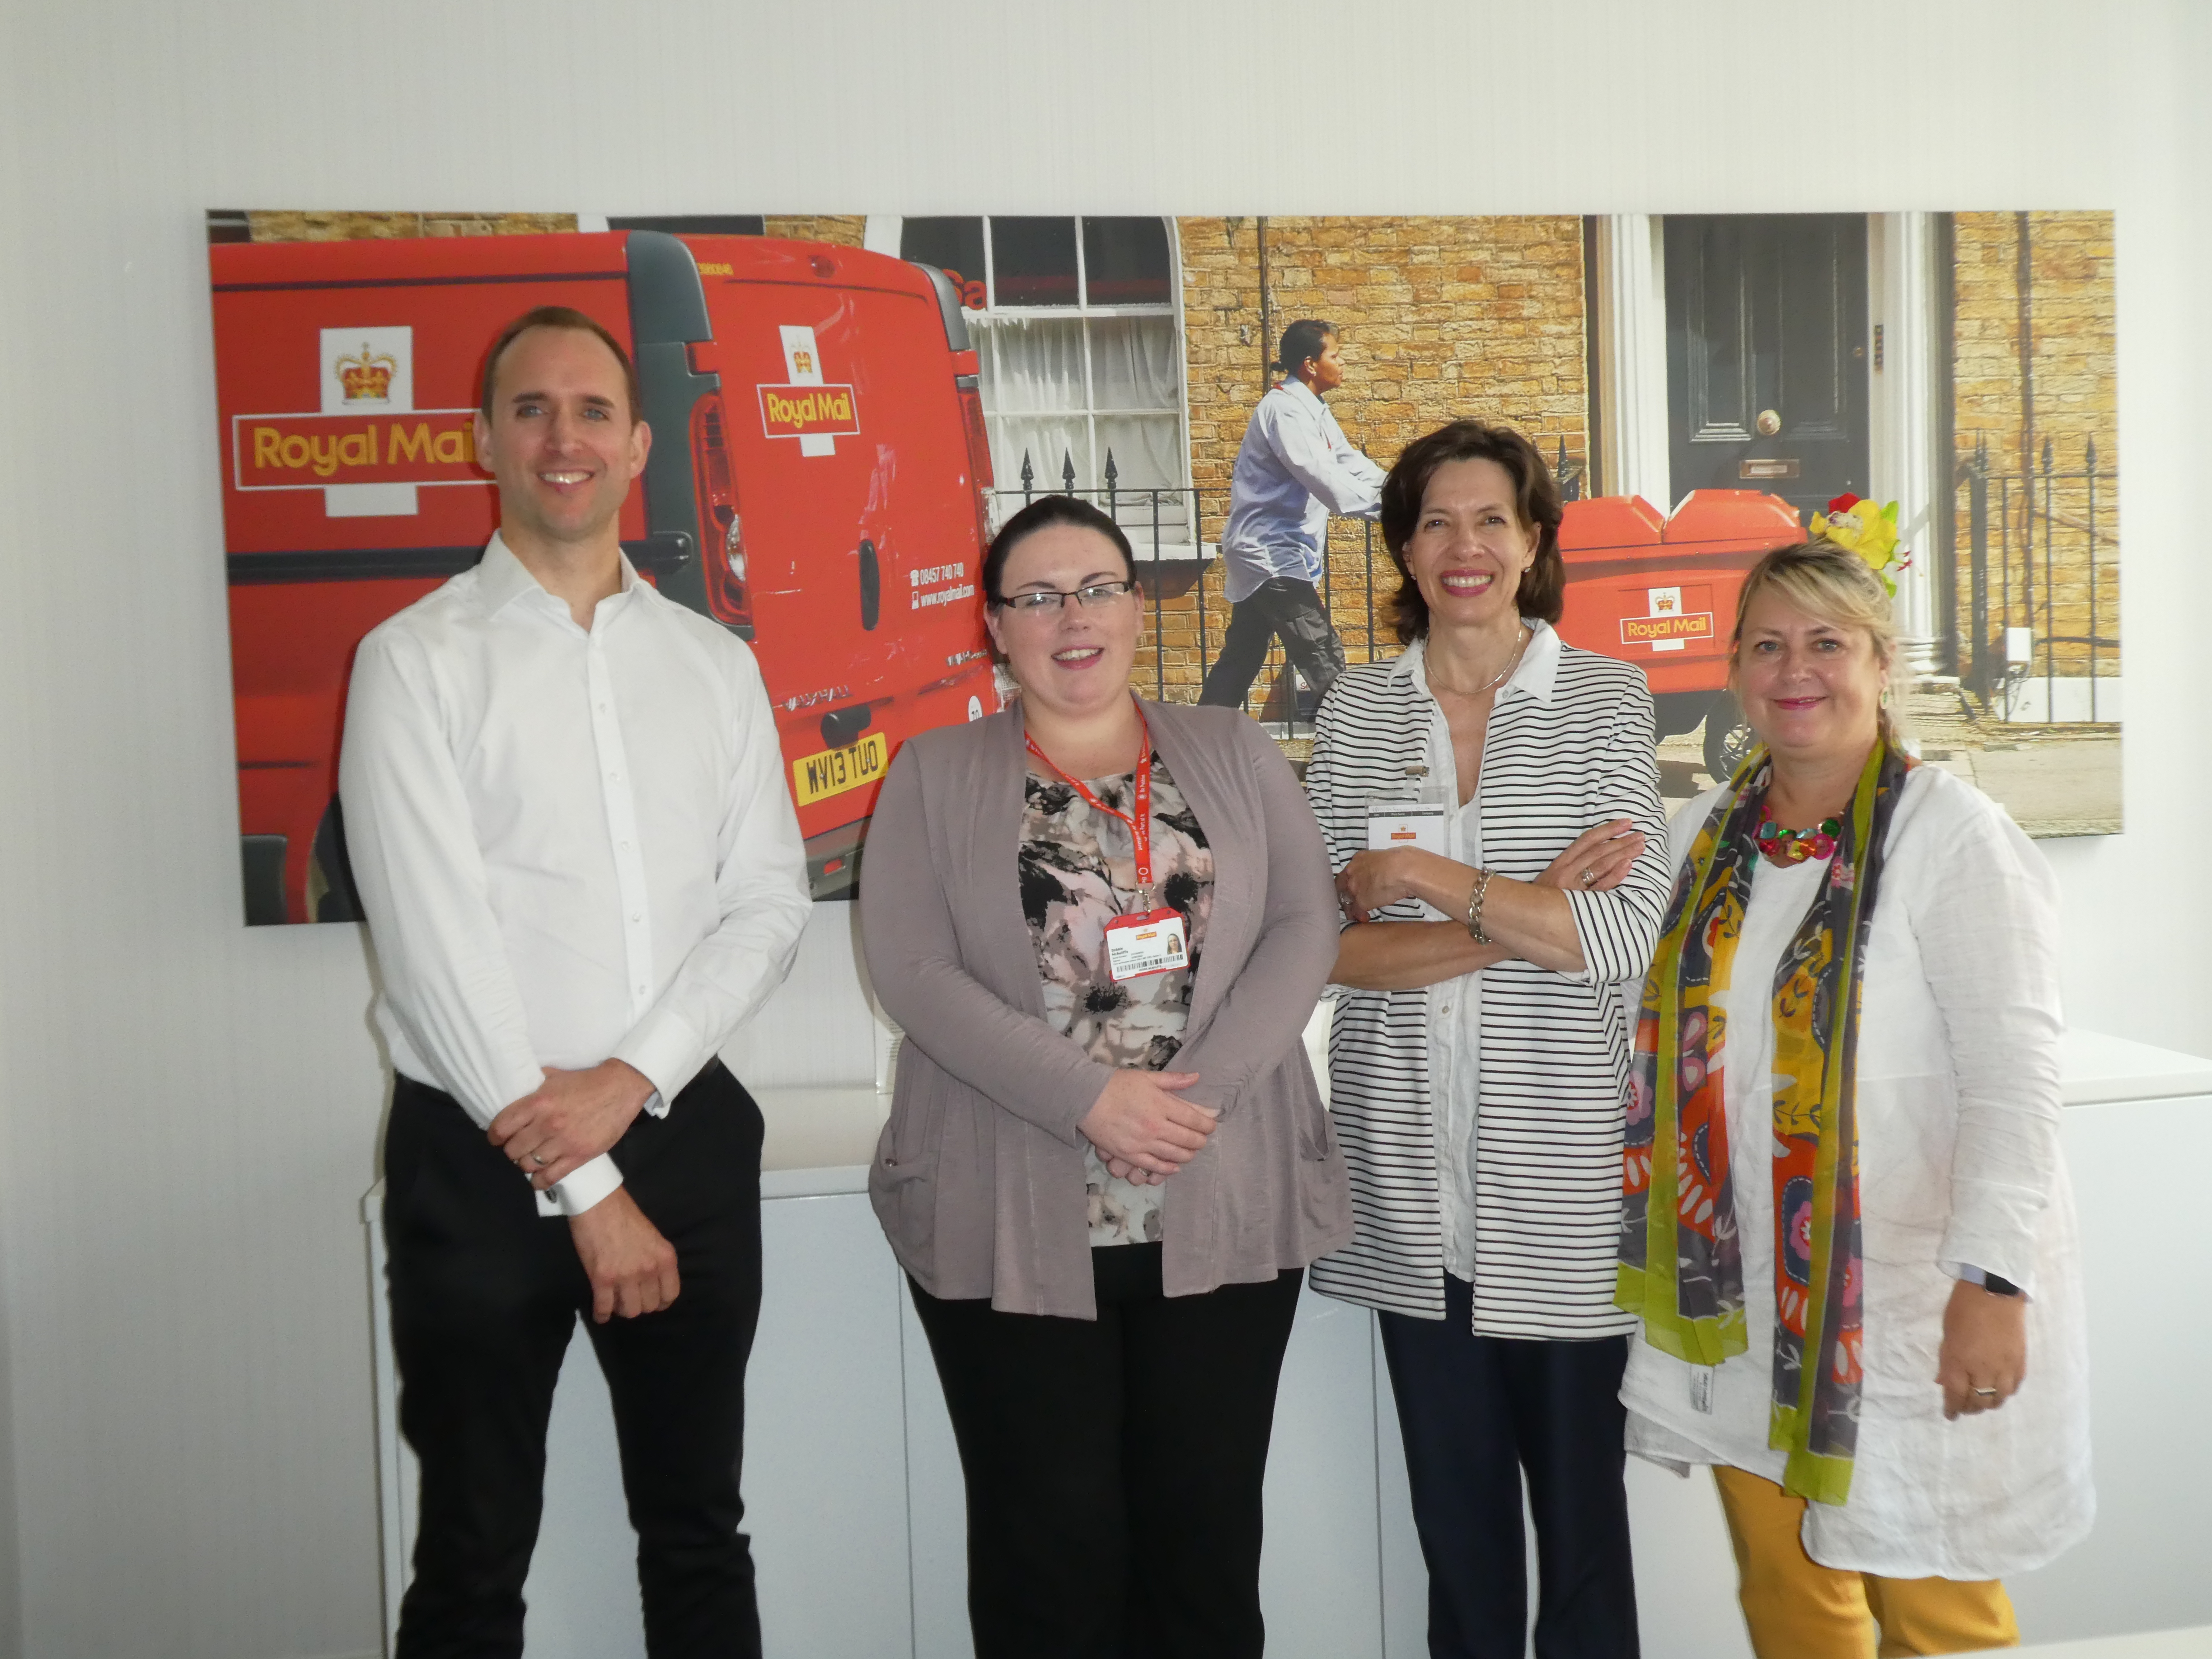 Above: GCA’s ceo Amanda Fergusson (second right) with Royal Mail’s Paul Tatman-Madsen and Debbie McAuliffe far left) and PG’s Jakki Brown at a recent meeting.  